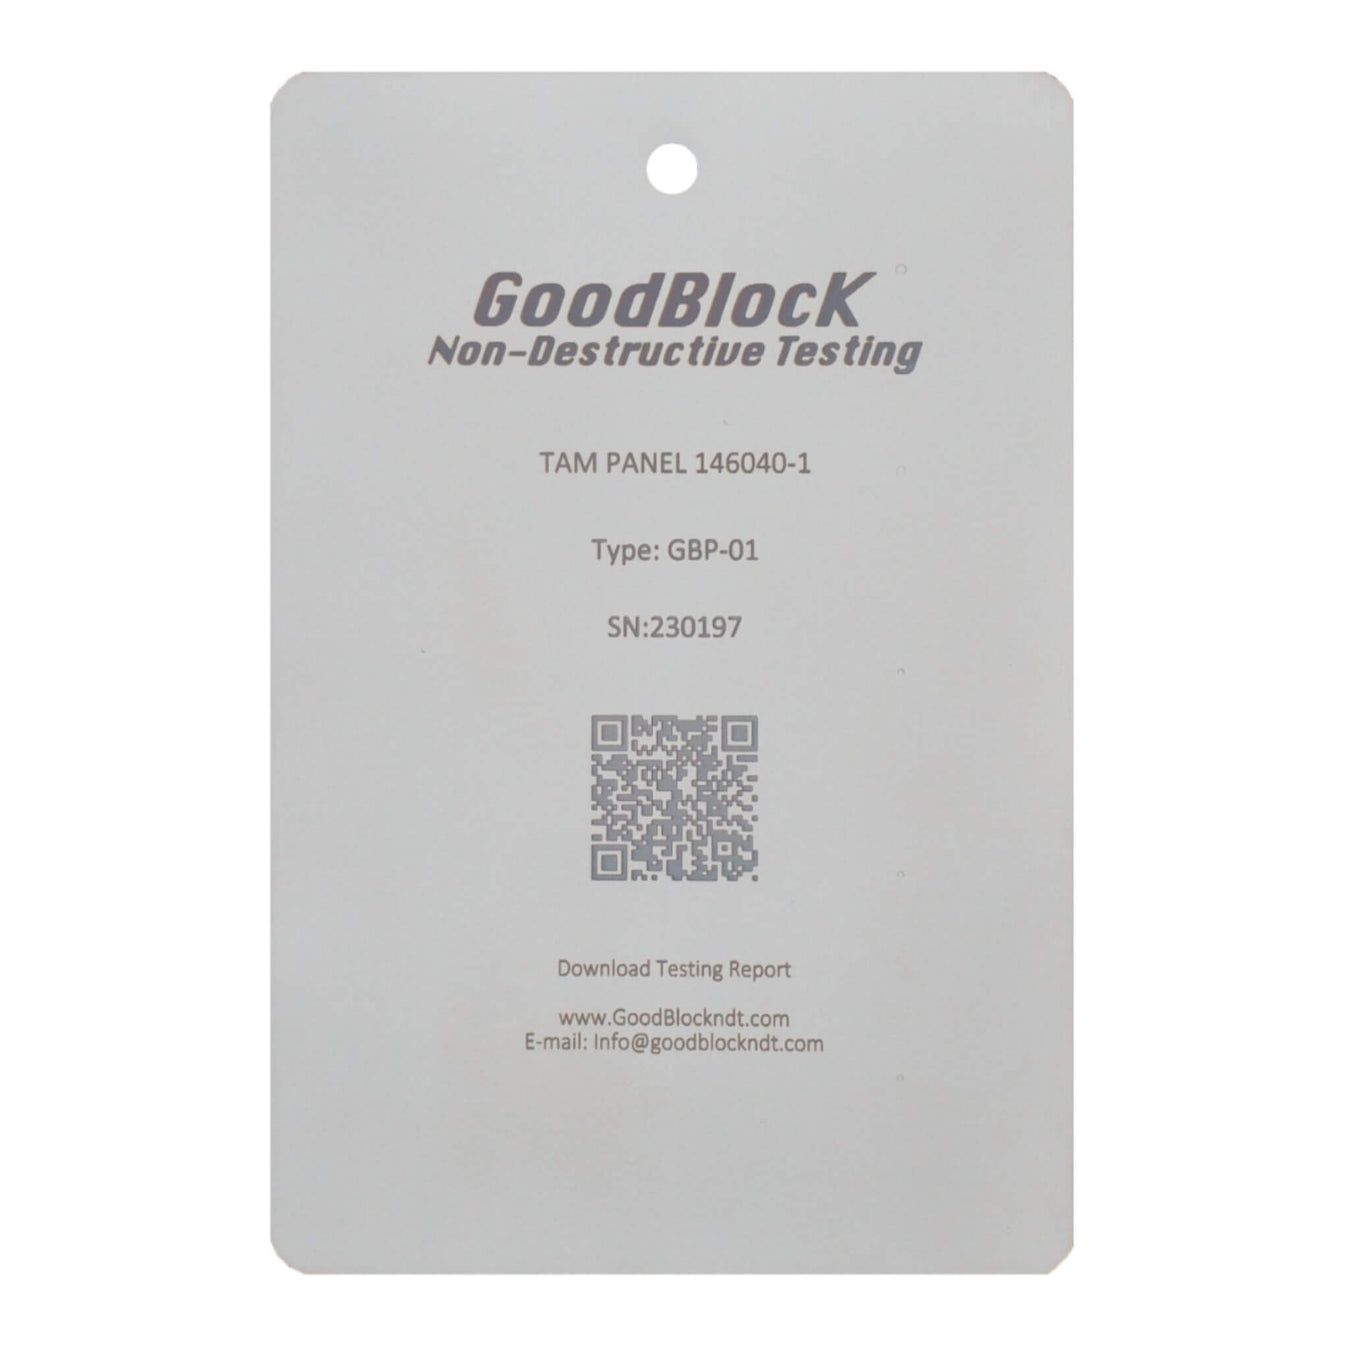 GoodBlock NDT Products